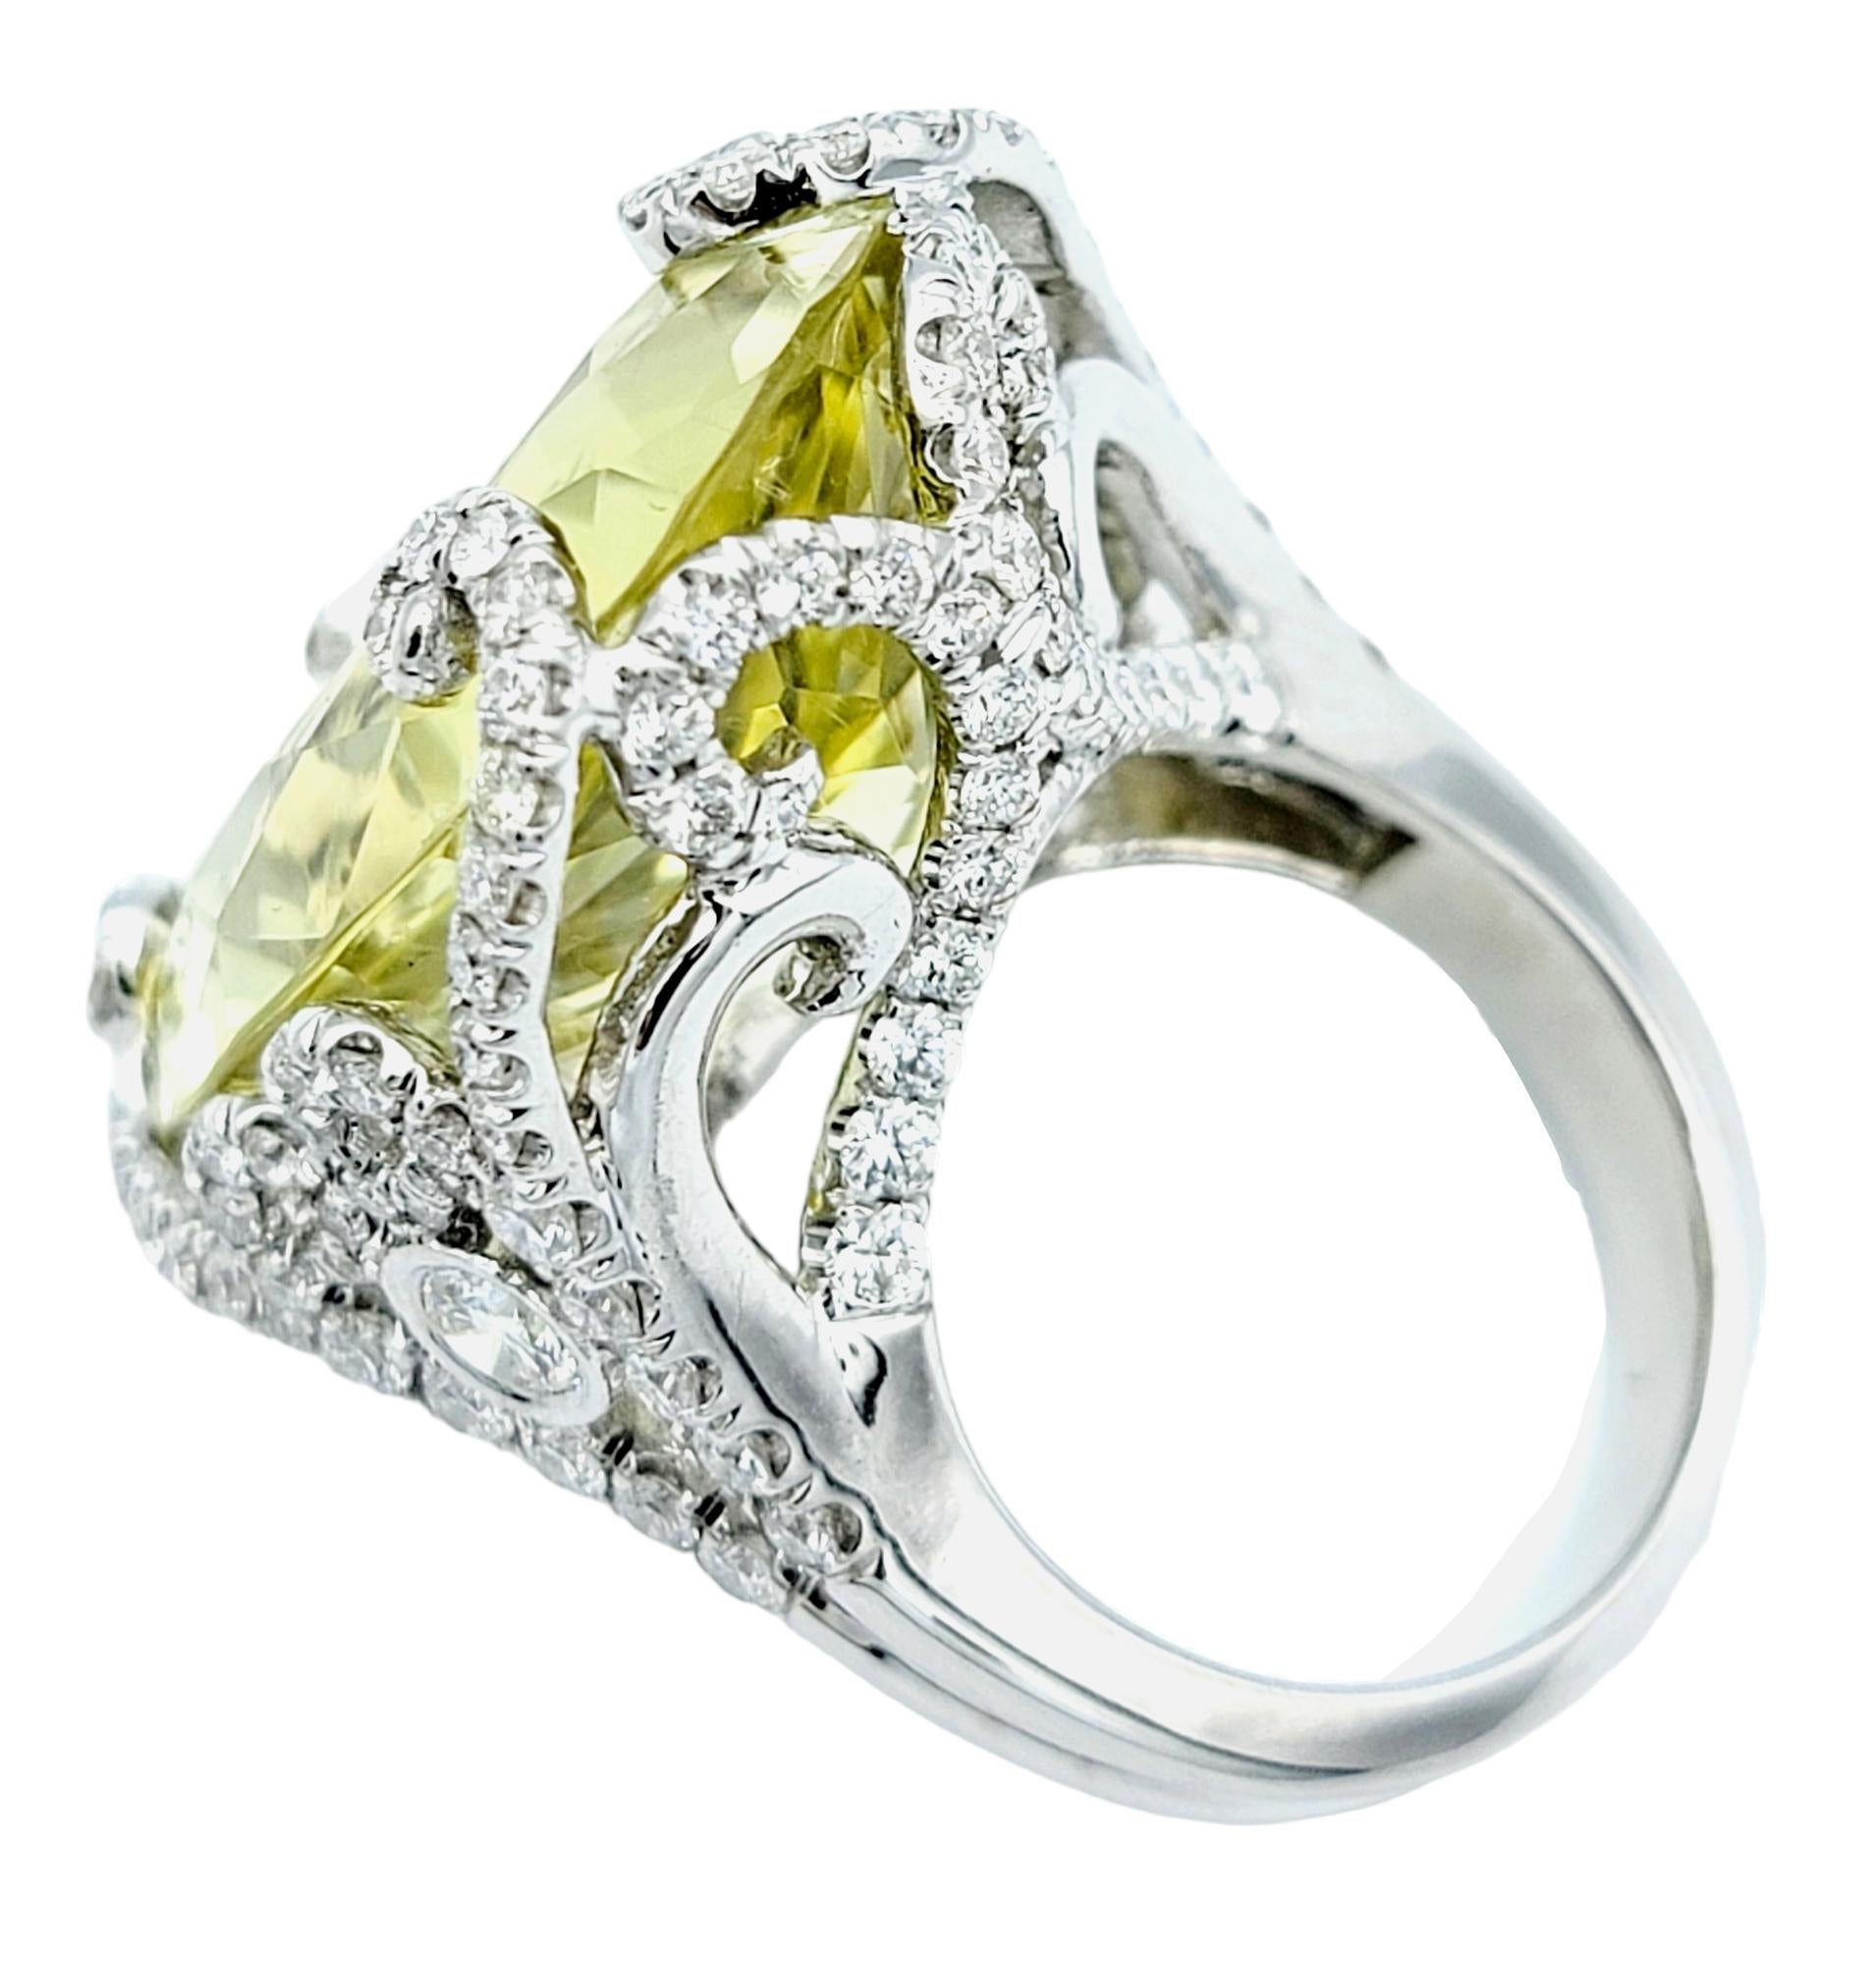 Women's Huge 31.0 Carat Oval Cut Prasiolite Cocktail Ring with Diamond Accents 14K Gold For Sale